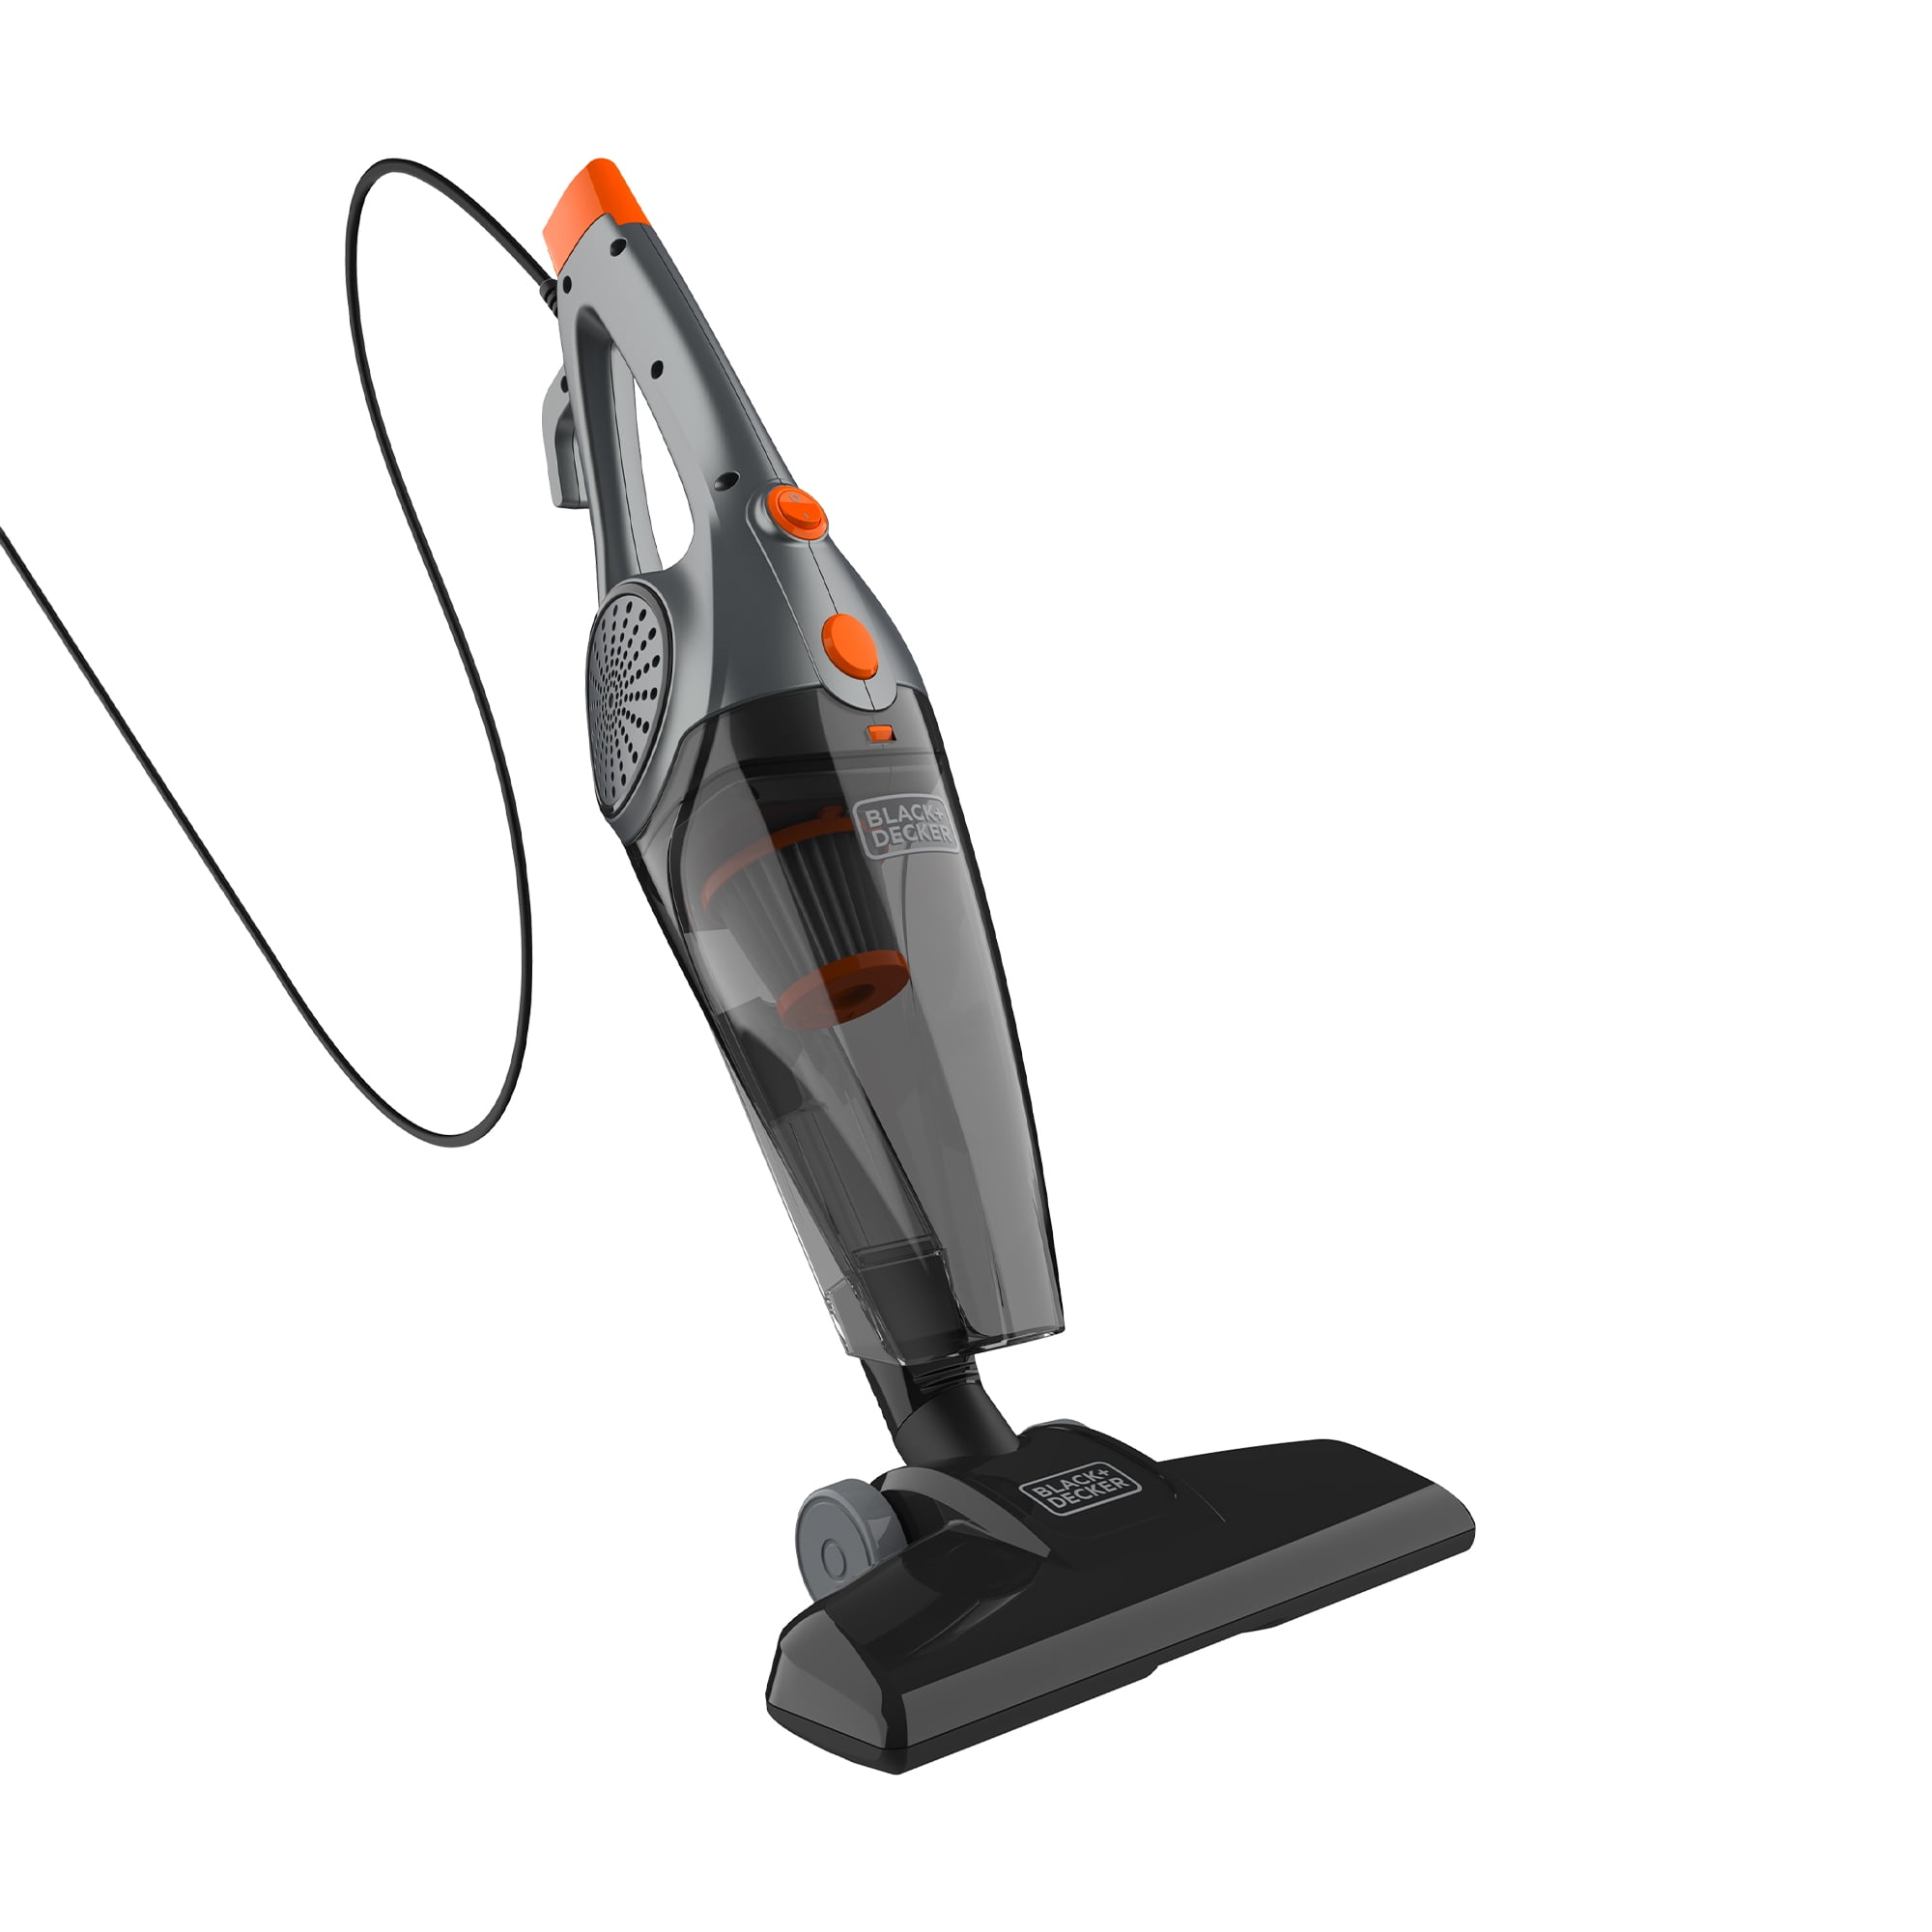  BLACK+DECKER 3-In-1 Upright, Stick & Handheld Vacuum Cleaner  with Washable HEPA Filter, Powerful Corded 480-Watt Motor, Ultra  Lightweight with Crevice Tool & Small Brush Attachments, Gray (BDXHHV005G)  : Everything Else